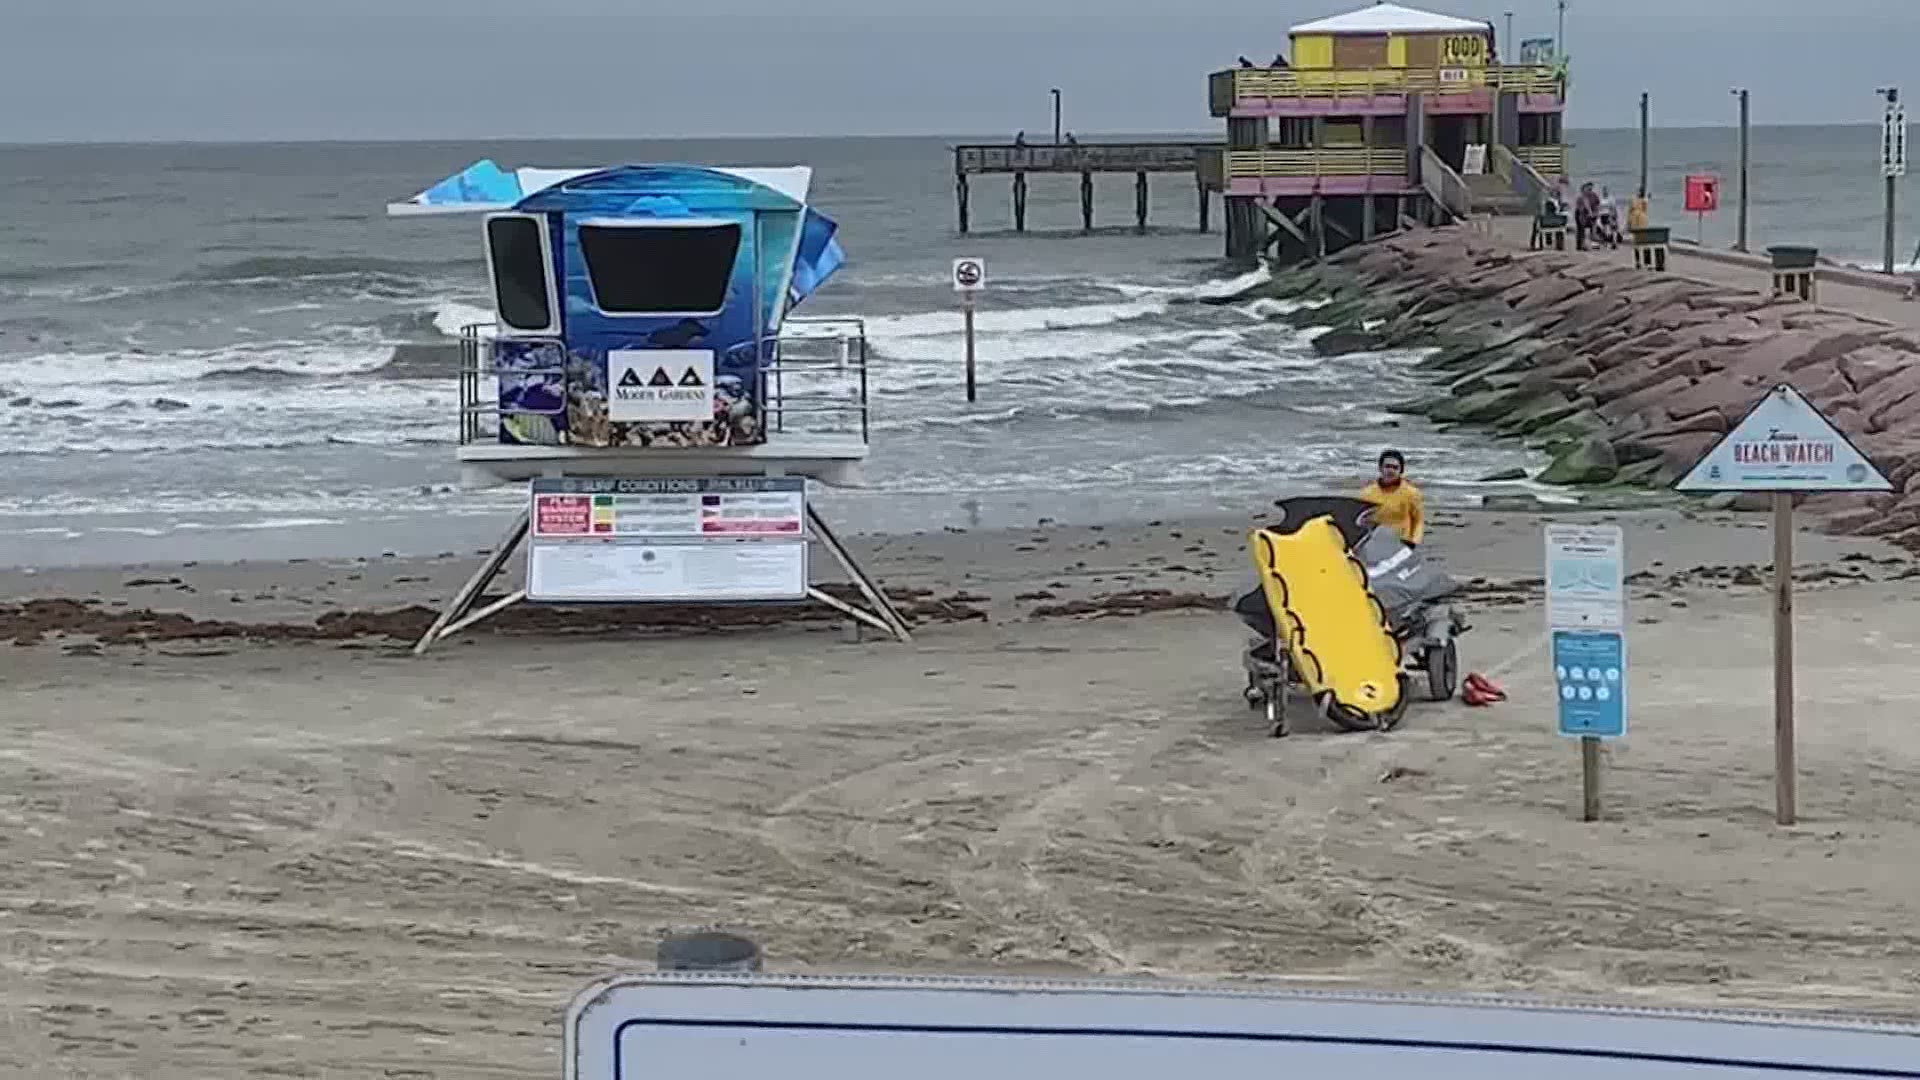 Crews in Galveston have been searching all day for a little boy who drowned Tuesday night.